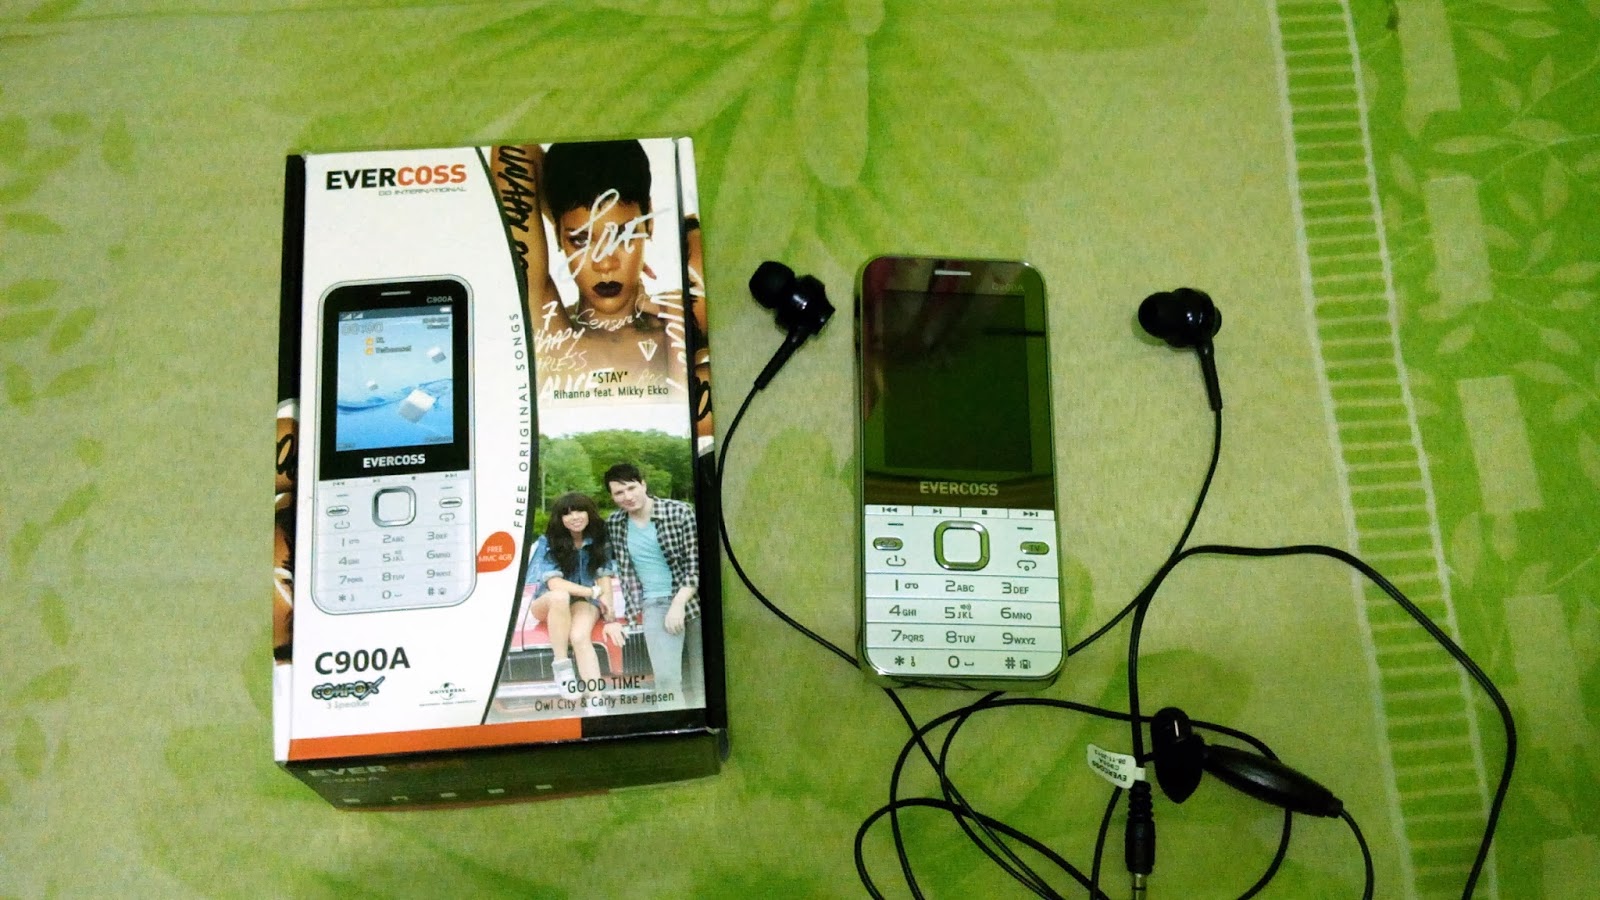 The Other Side EVERCOSS C900A PONSEL CANDYBAR DENGAN AUDIO YANG